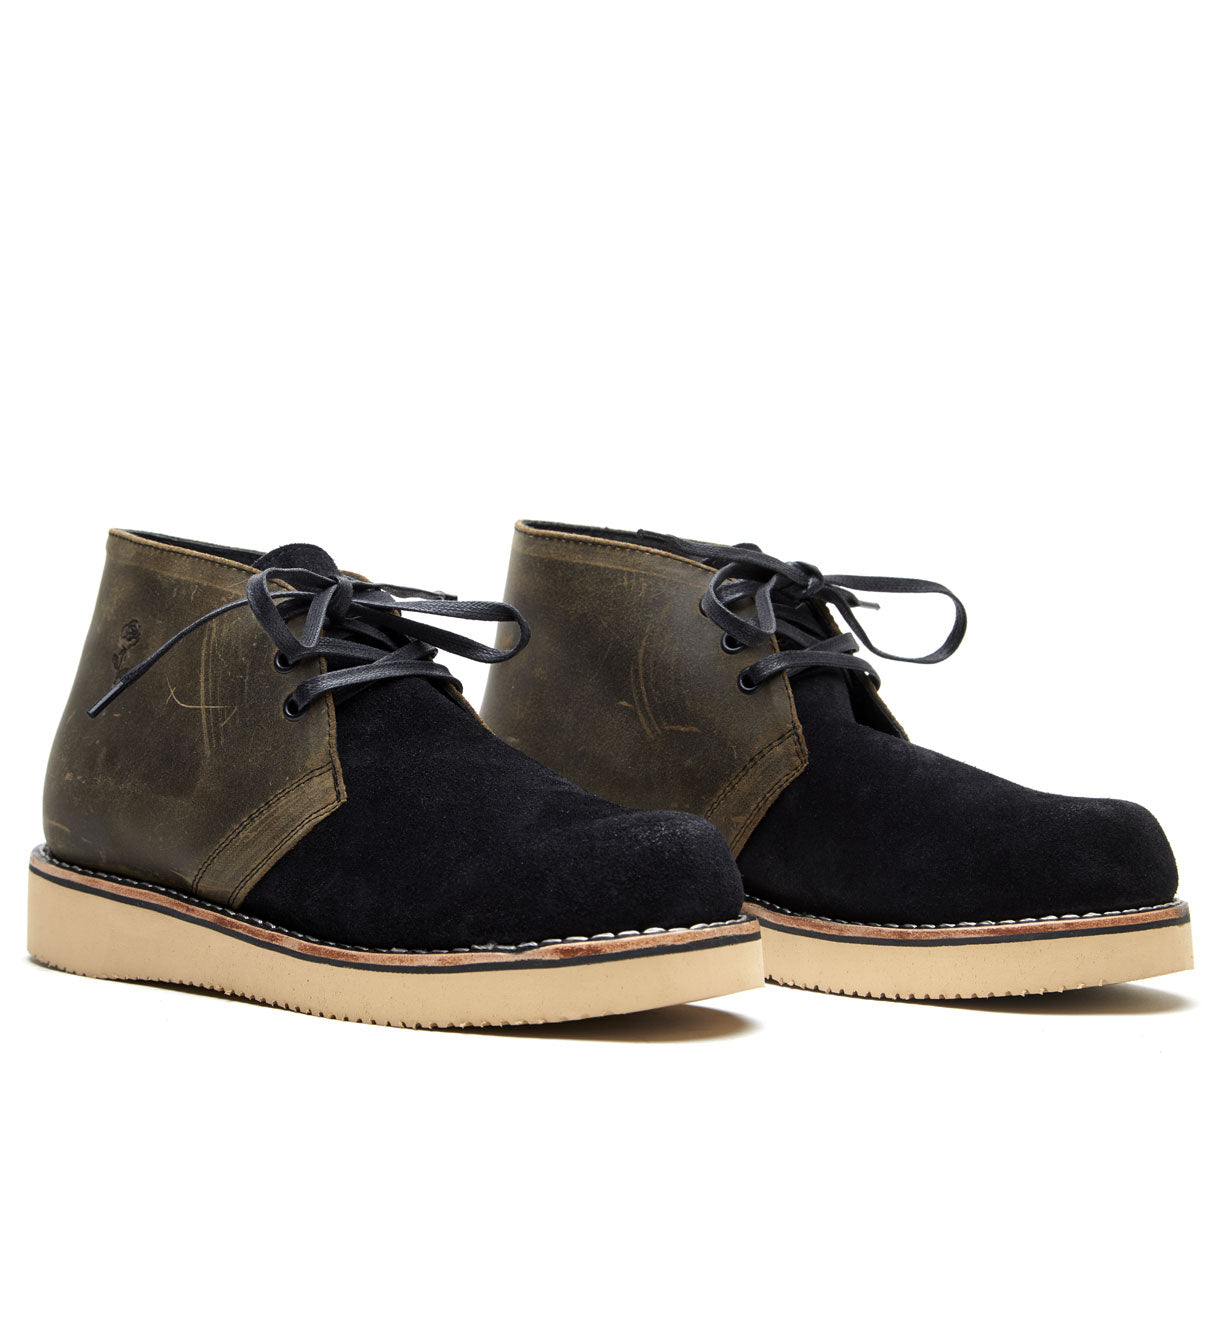 A pair of black suede Union chukka boots from the Santa Rosa Brand collection, featuring a Union boot design and goodyear welt construction, showcased on a white background.